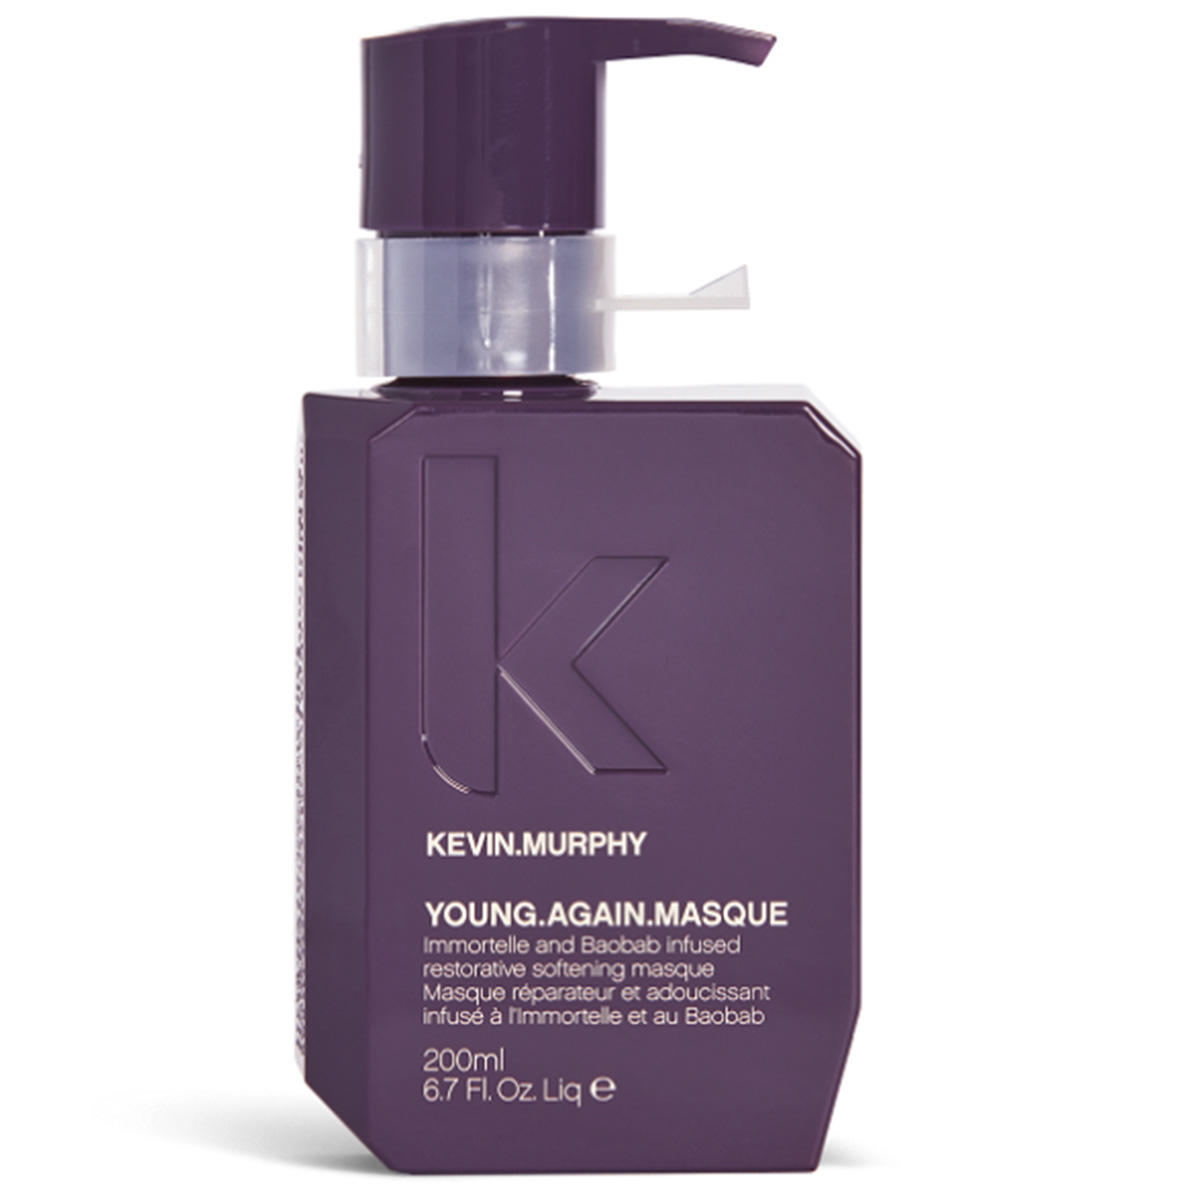 KEVIN.MURPHY YOUNG.AGAIN Masque 200 ml